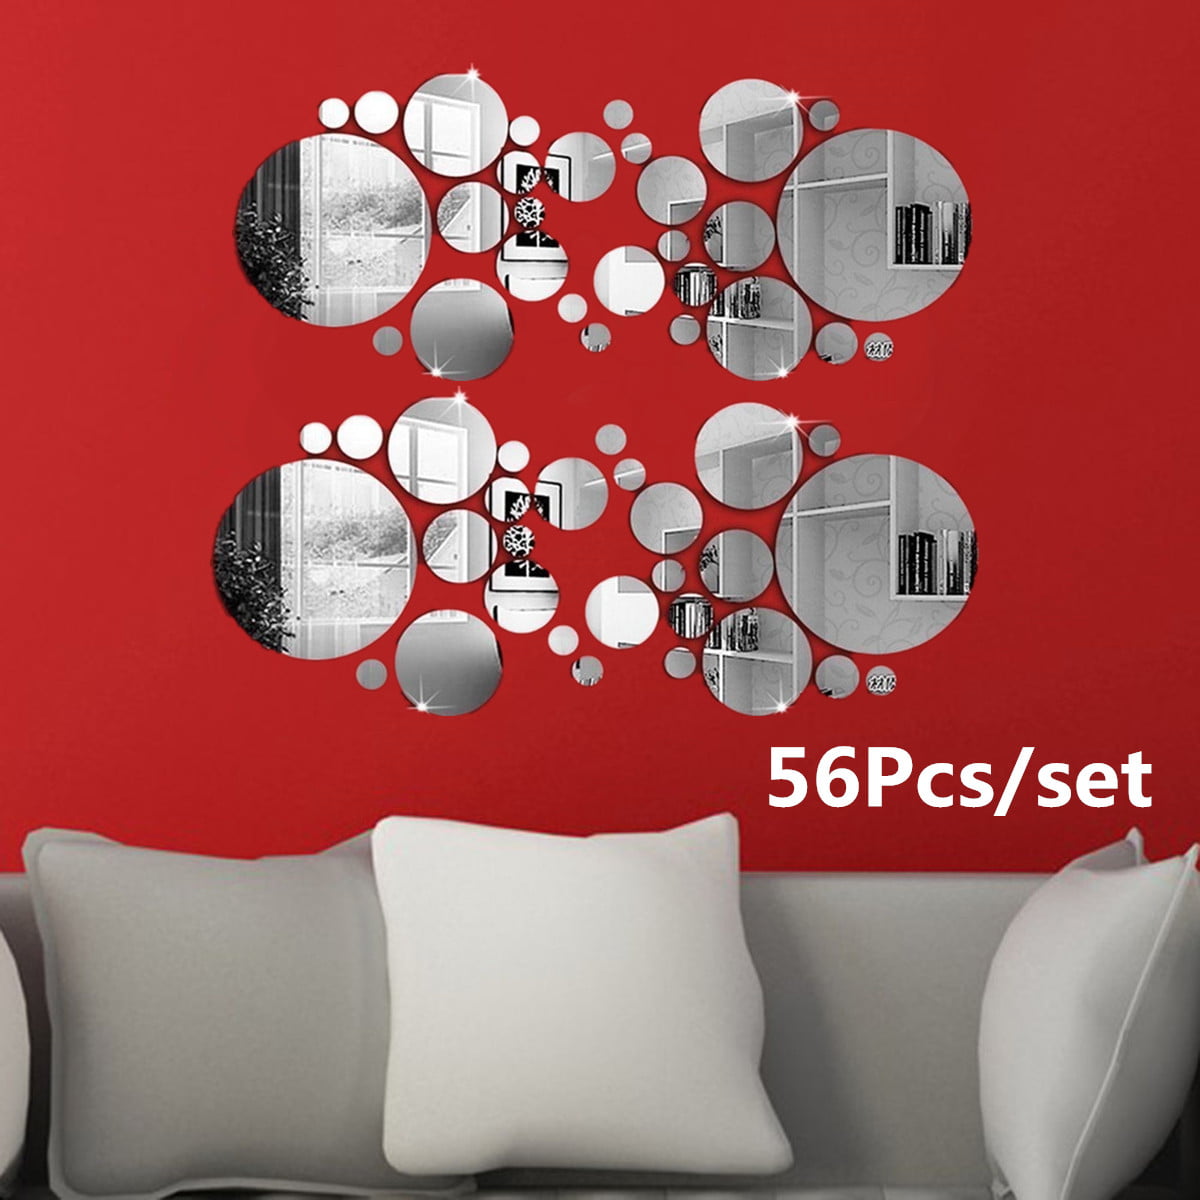 3D Mirror Wall-Stickers Art Acrylic Mural Decal Pattern Home-Decor Removable DIY